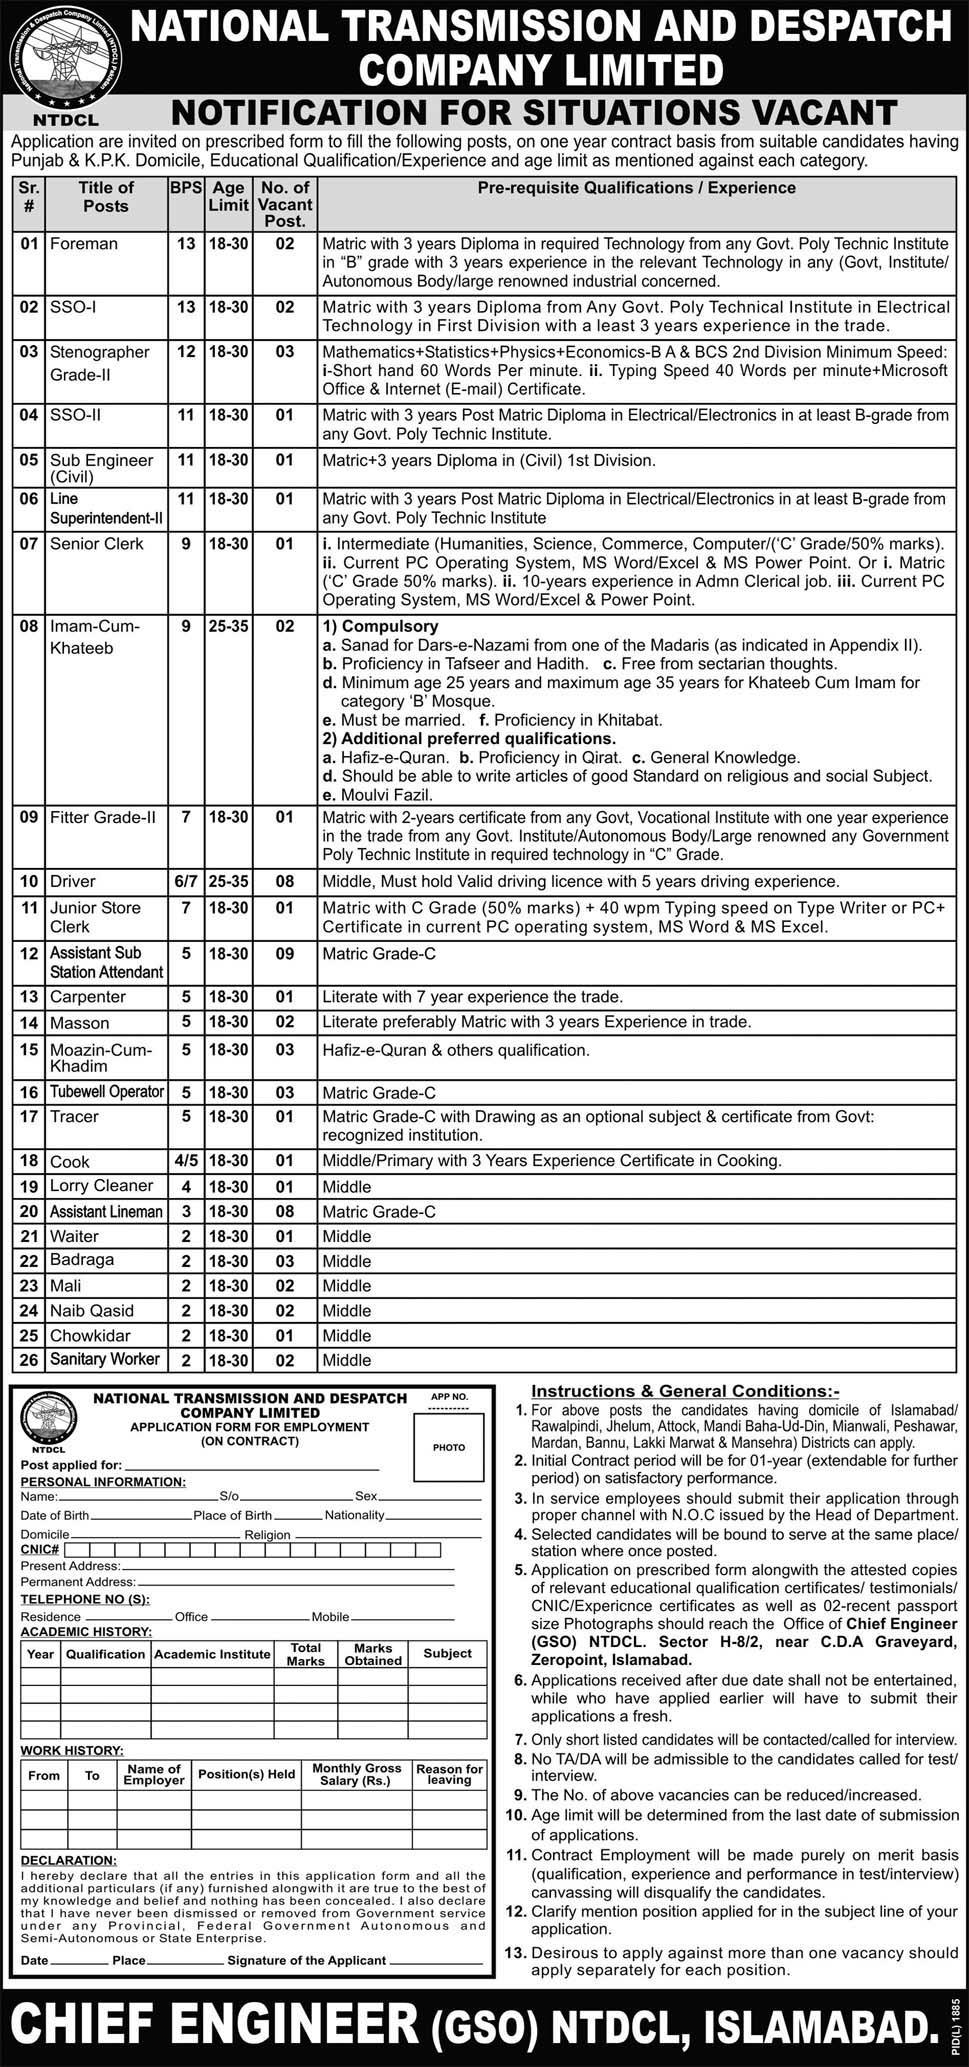 National Transmission and Dispatch Company Ltd Jobs Opportunity